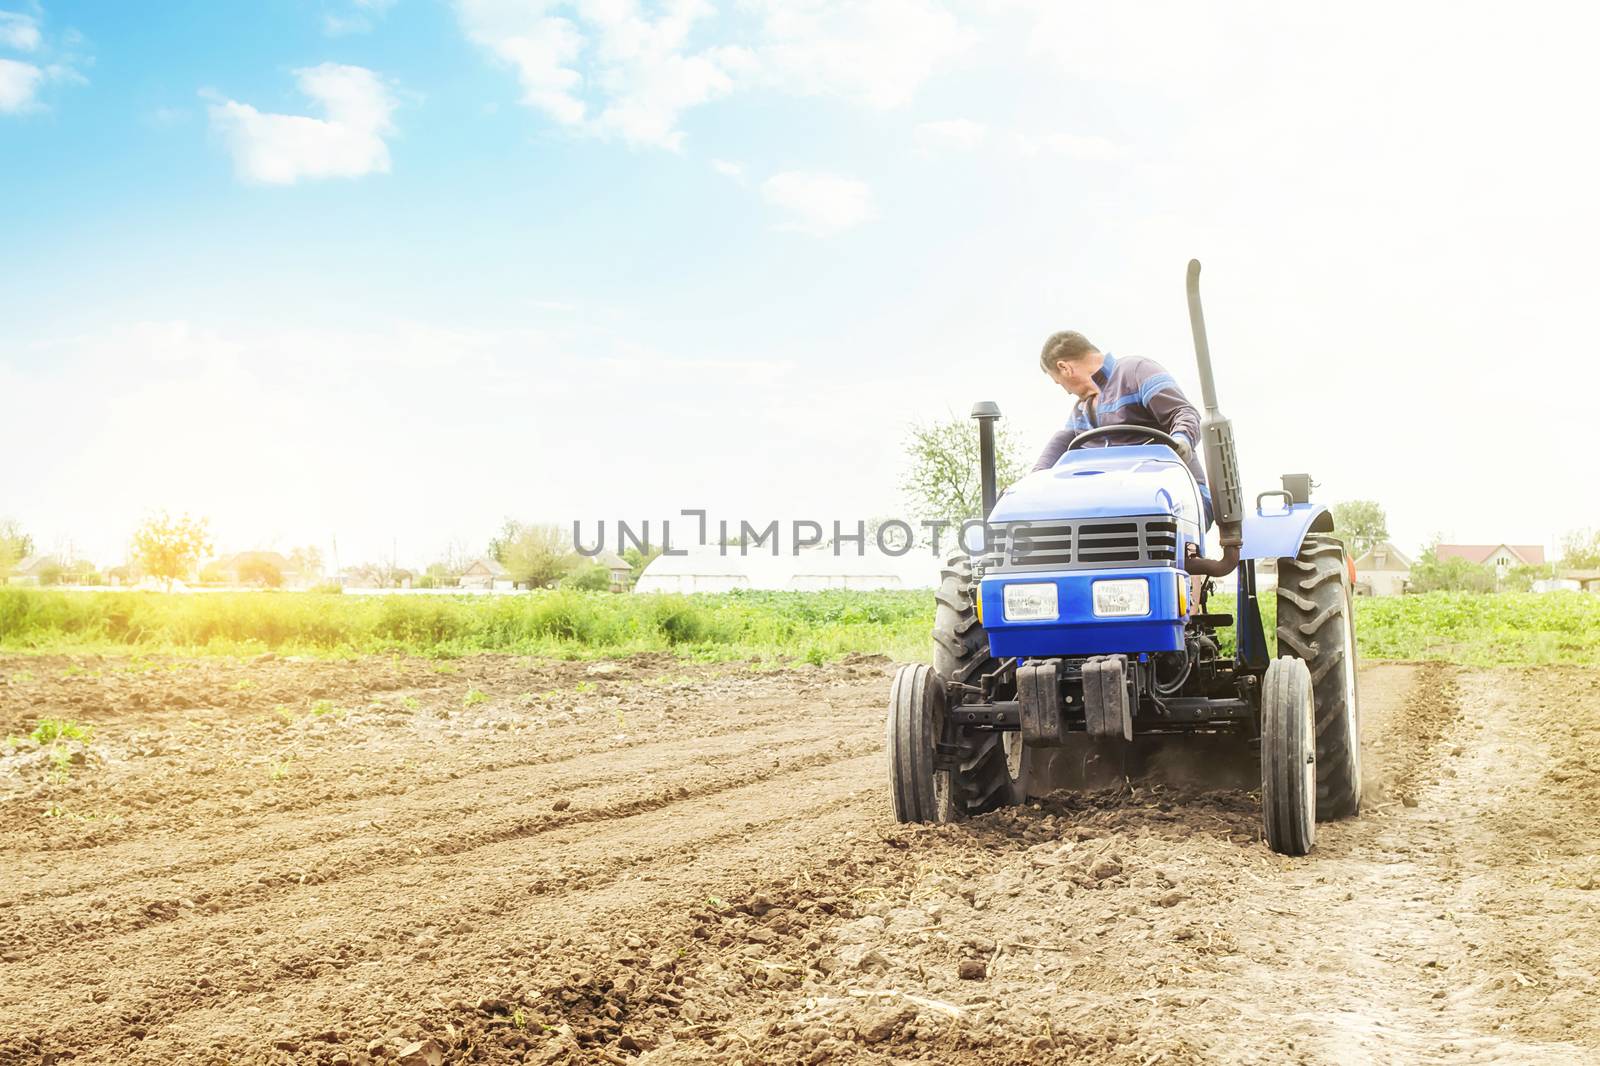 Farmer on a tractor with milling machine loosens, grinds and mixes soil. Loosening surface, cultivating the land for further planting. Farming and agriculture. Use of agricultural machinery on a farm.